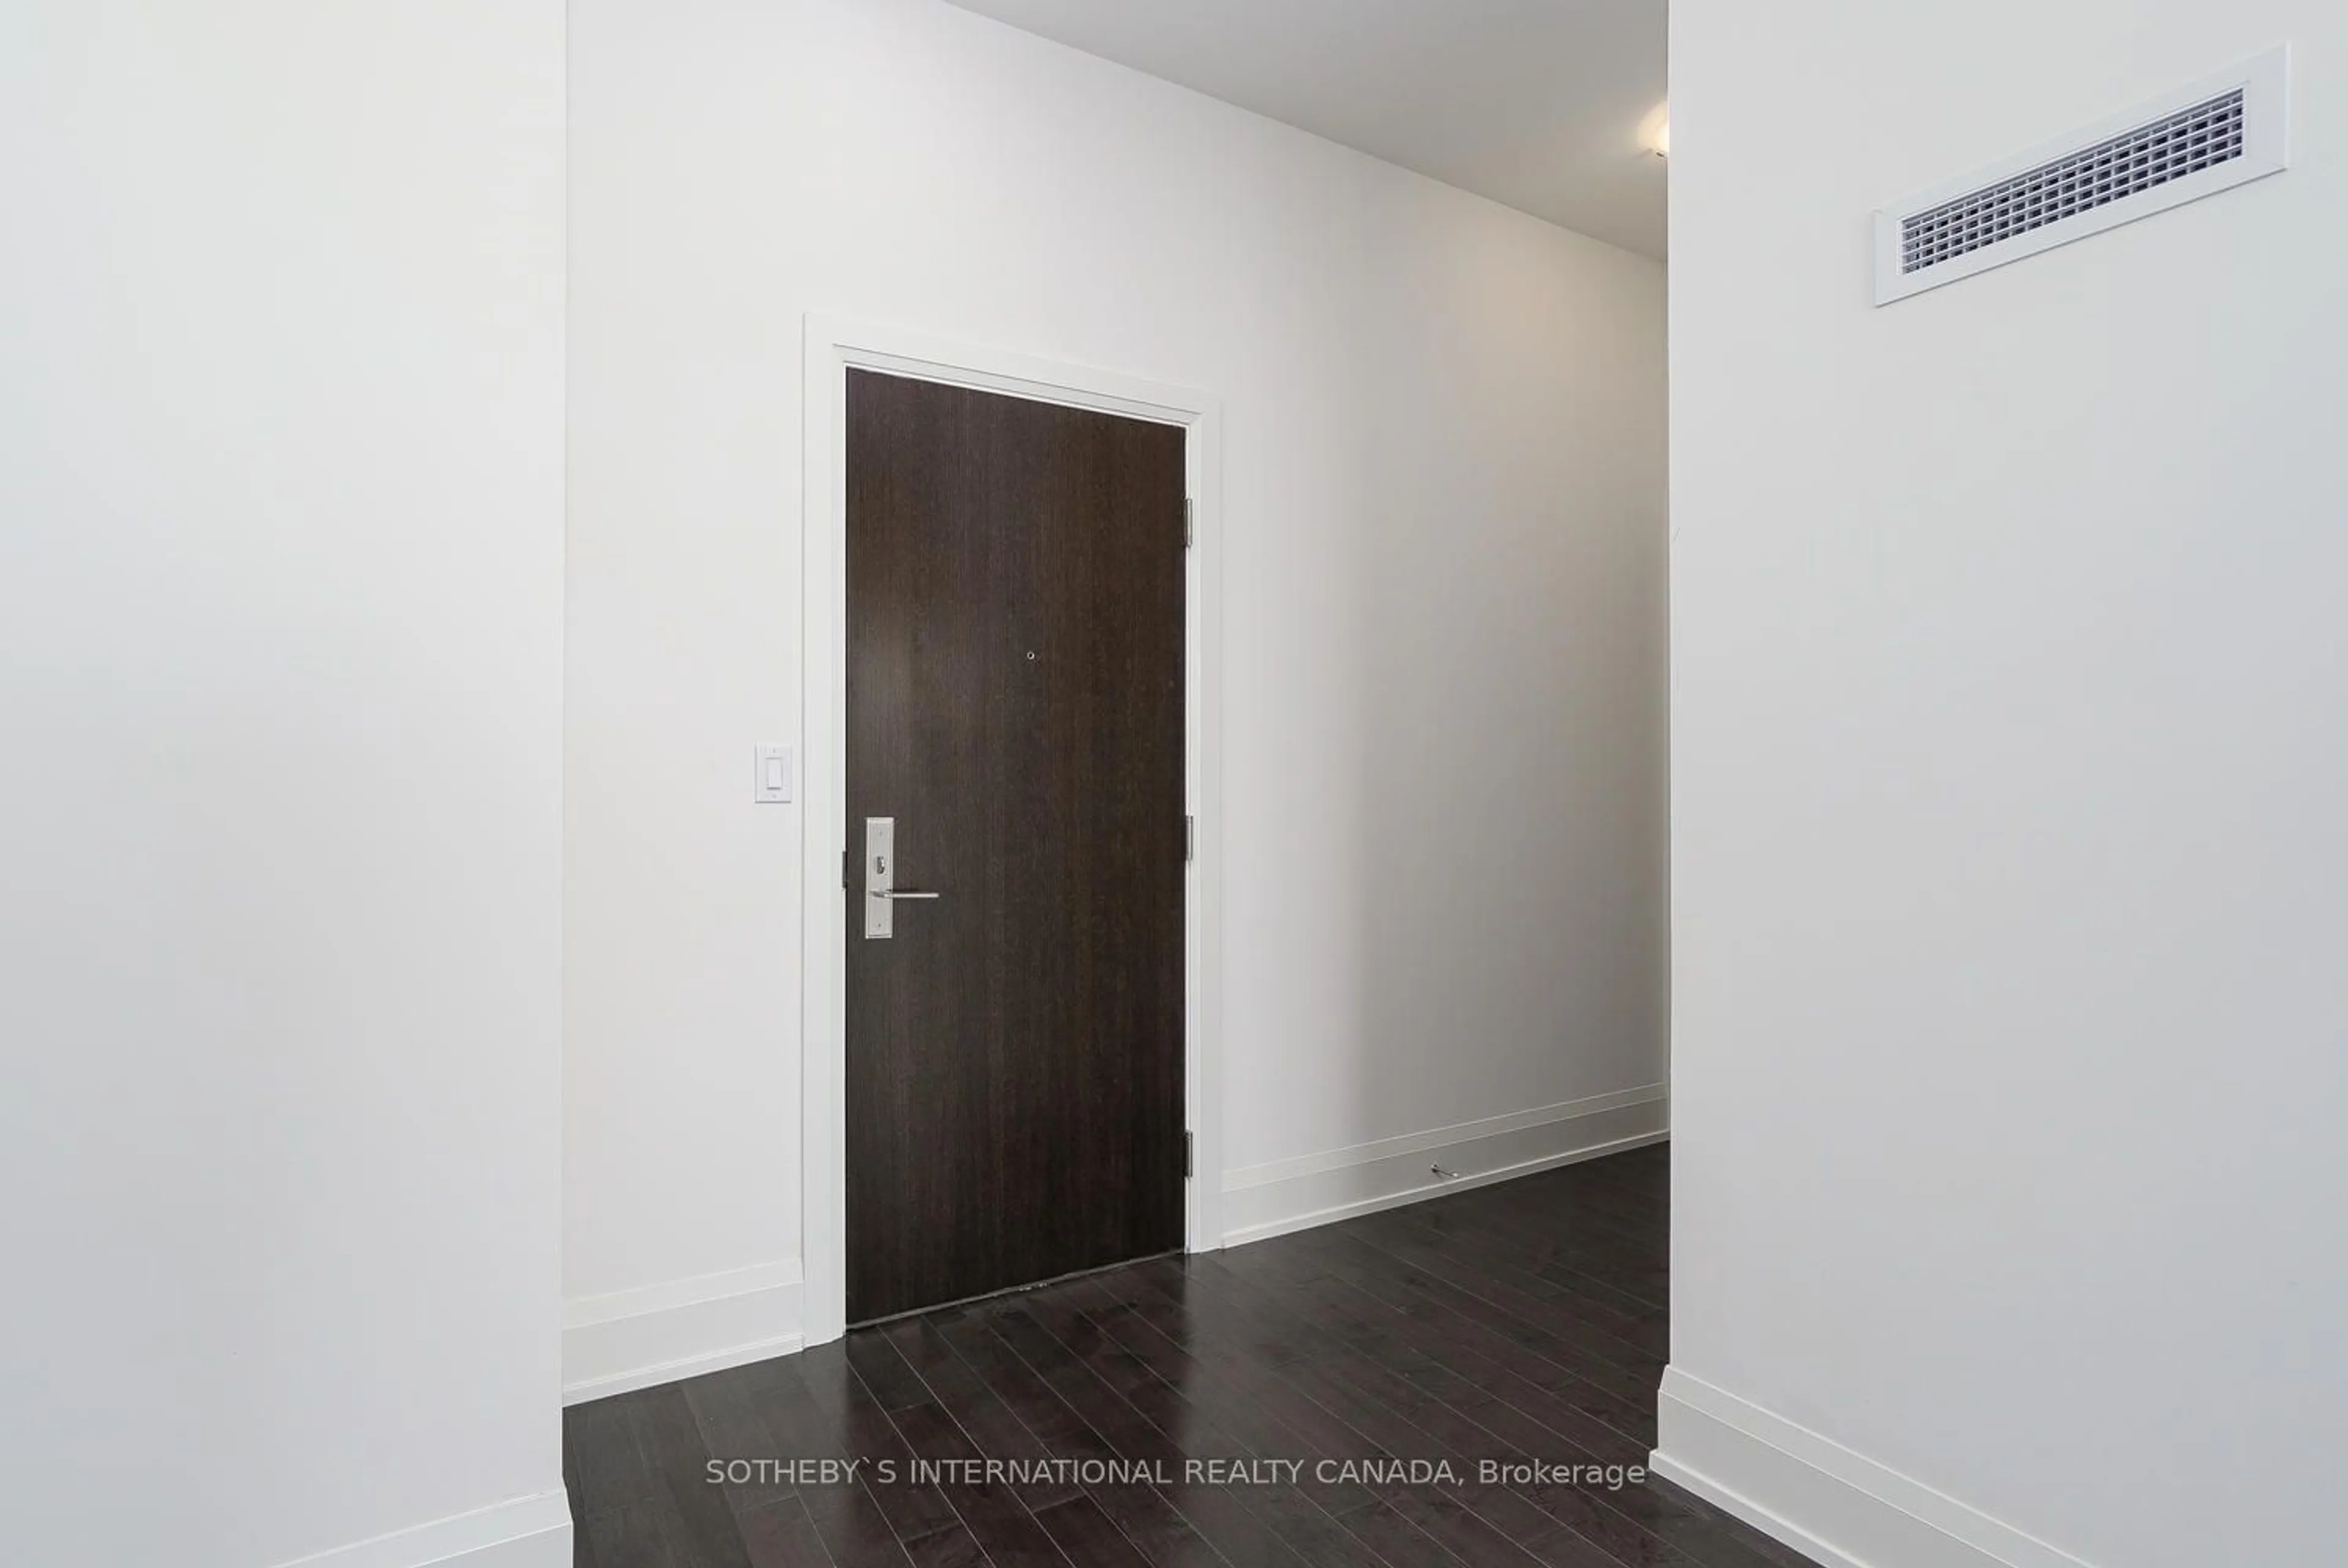 Indoor entryway for 460 Adelaide St #Ph207, Toronto Ontario M5A 1N6